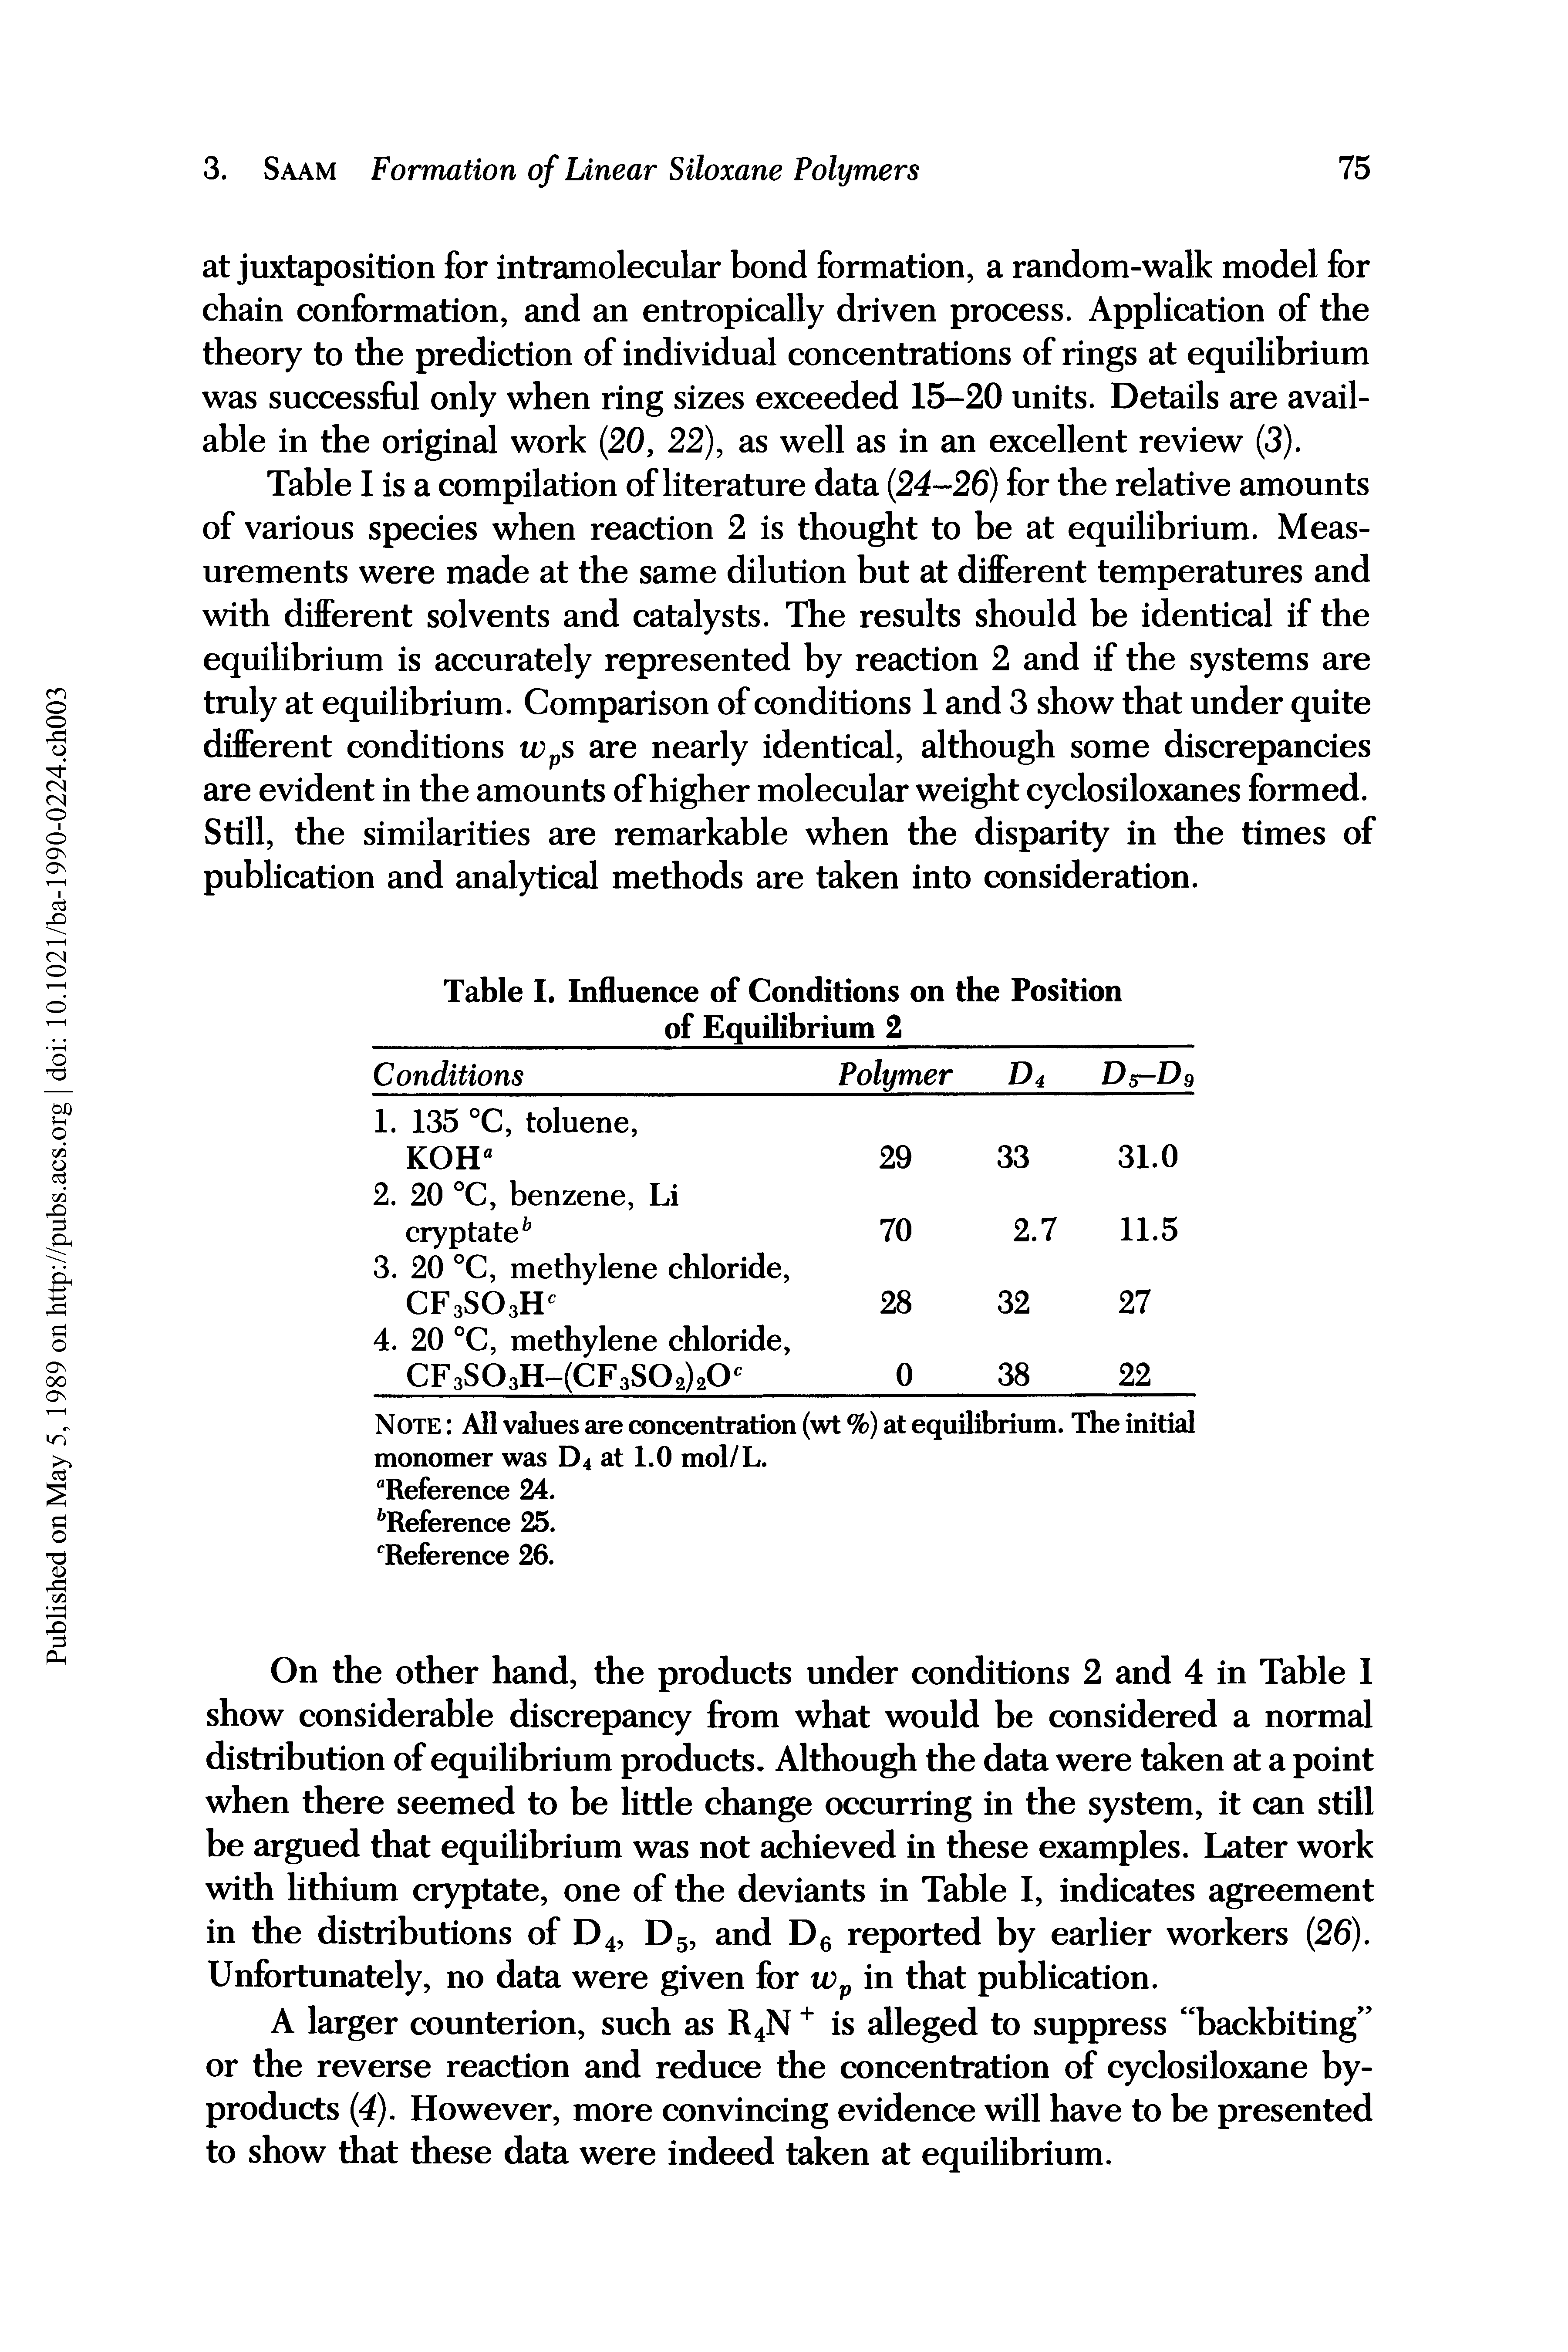 Table I is a compilation of literature data (24-26) for the relative amounts of various species when reaction 2 is thought to be at equilibrium. Measurements were made at the same dilution but at different temperatures and with different solvents and catalysts. The results should be identical if the equilibrium is accurately represented by reaction 2 and if the systems are truly at equilibrium. Comparison of conditions 1 and 3 show that under quite different conditions w s are nearly identical, although some discrepancies are evident in the amounts of higher molecular weight cyclosiloxanes formed. Still, the similarities are remarkable when the disparity in the times of publication and analytical methods are taken into consideration.